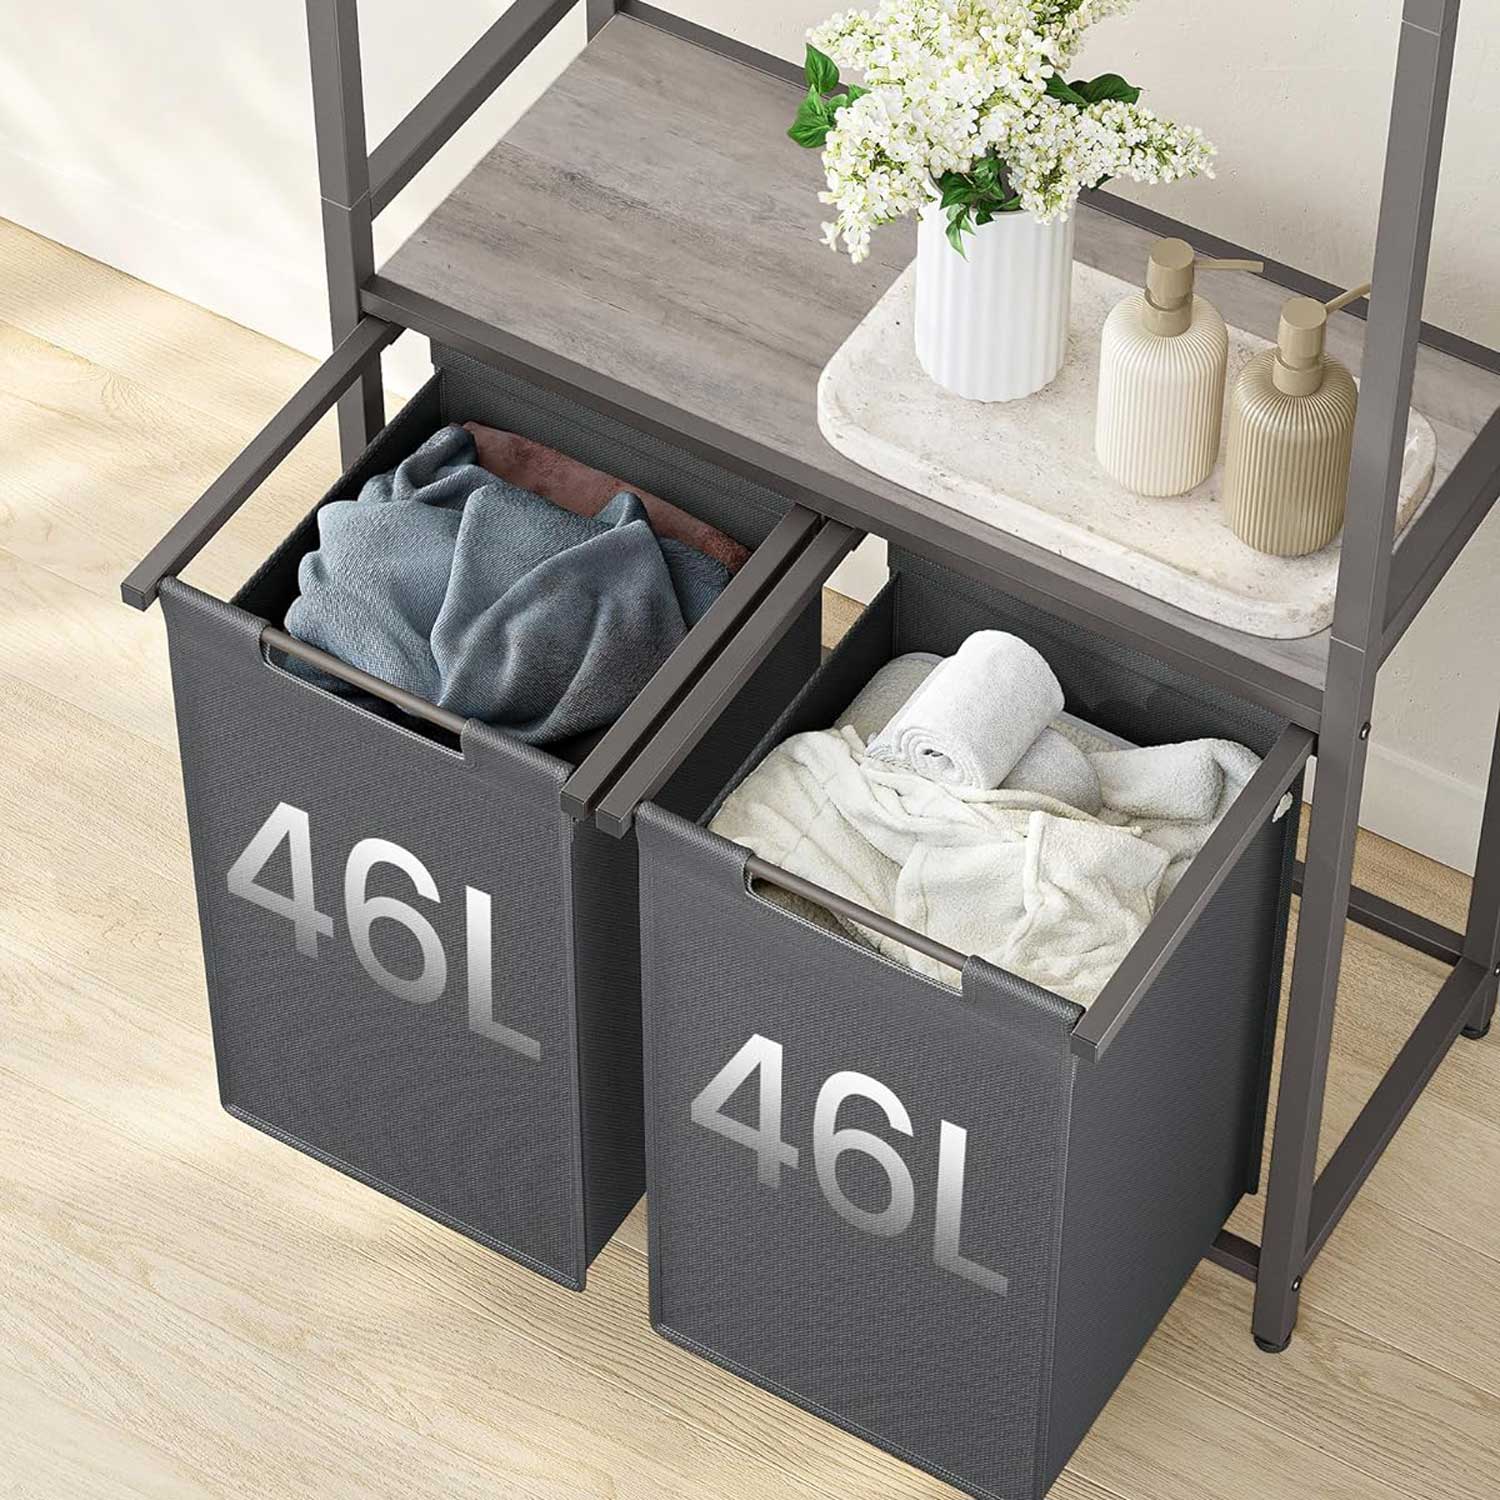 Double Laundry Basket, Grey Laundry Basket, 2-Section Laundry Basket with Removable Liners, 2 x 12.1, VASAGLE, 2